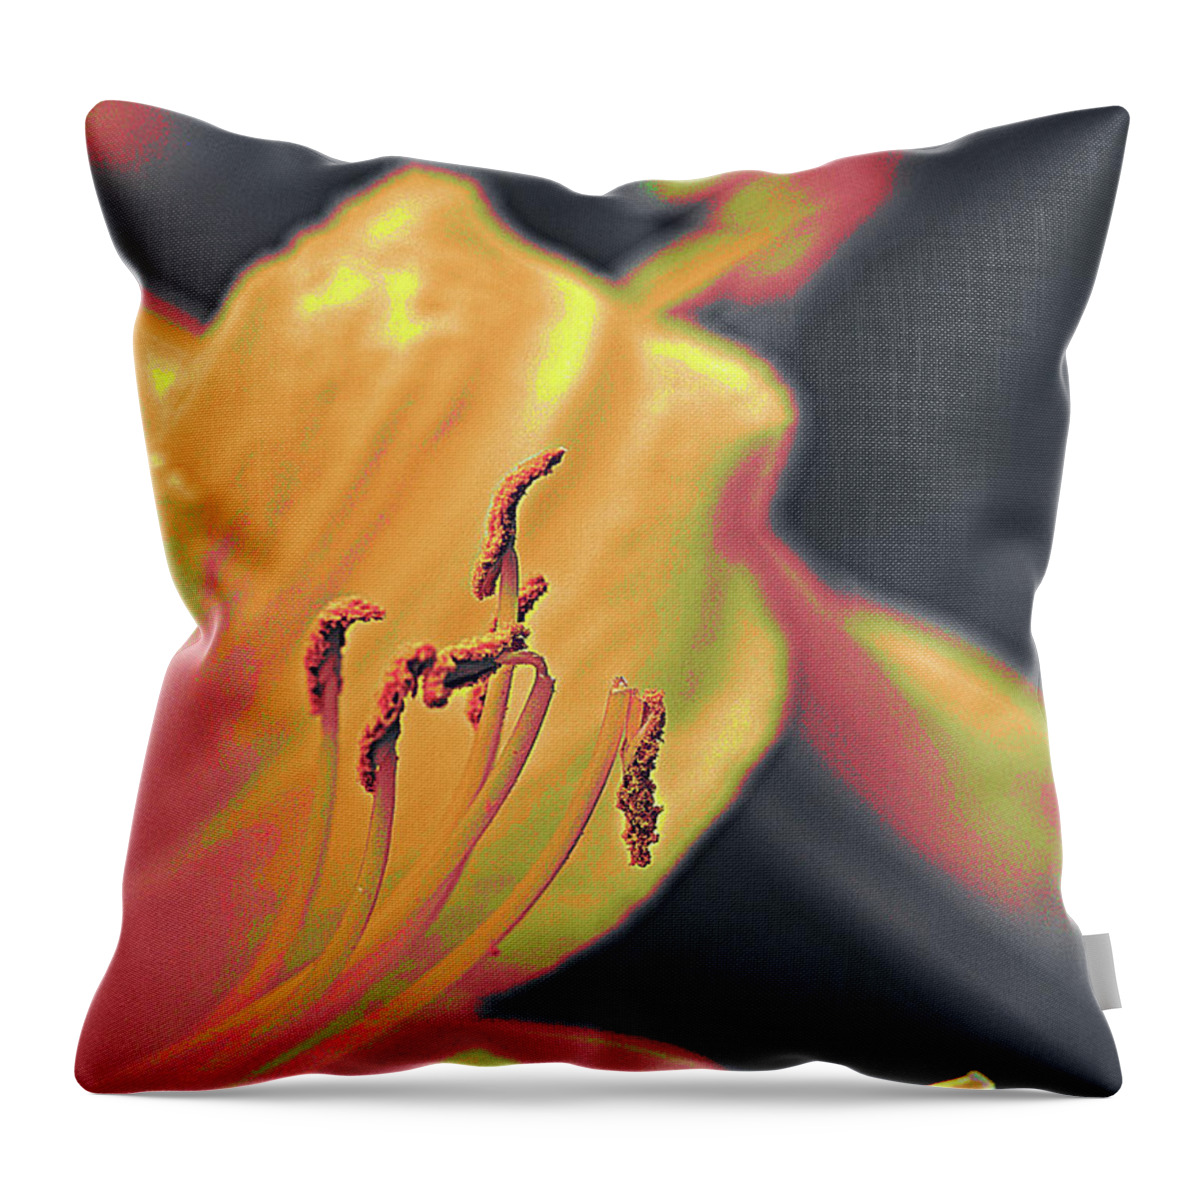 Floral Throw Pillow featuring the photograph Day Lilly by Bearj B Photo Art